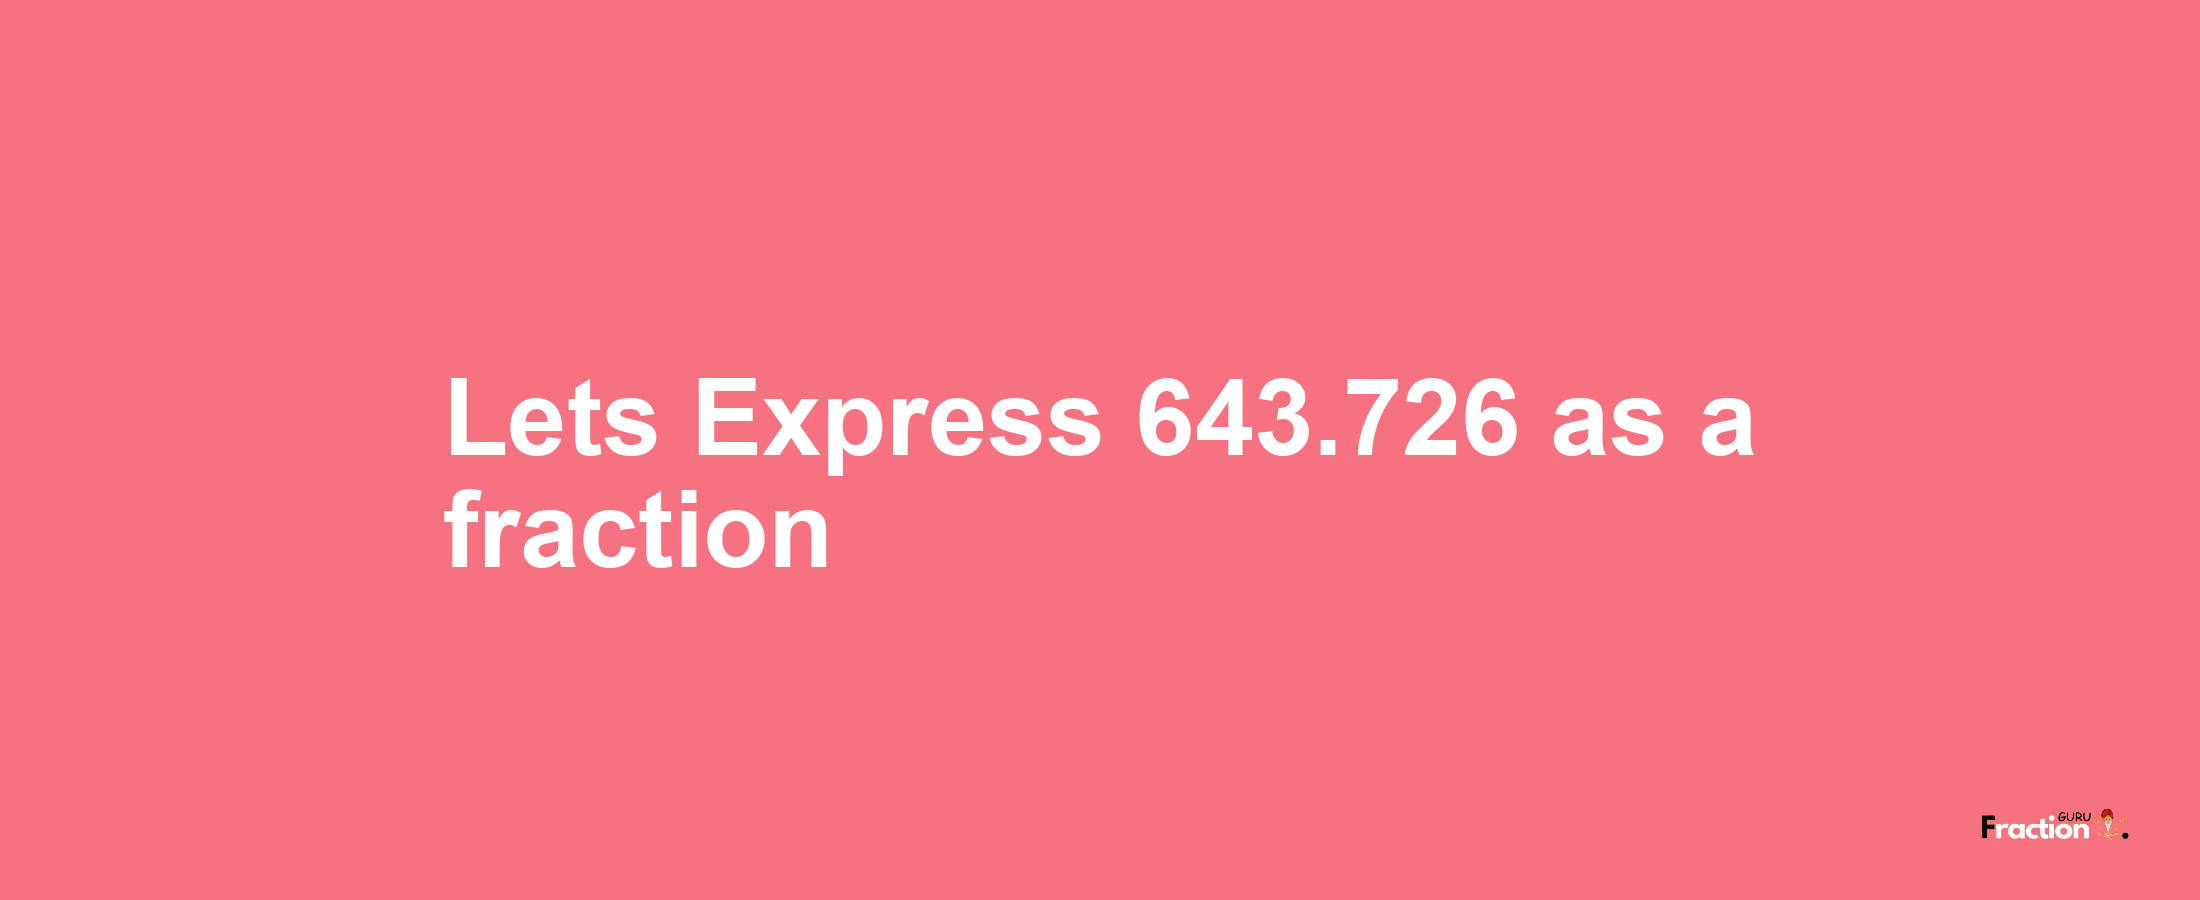 Lets Express 643.726 as afraction